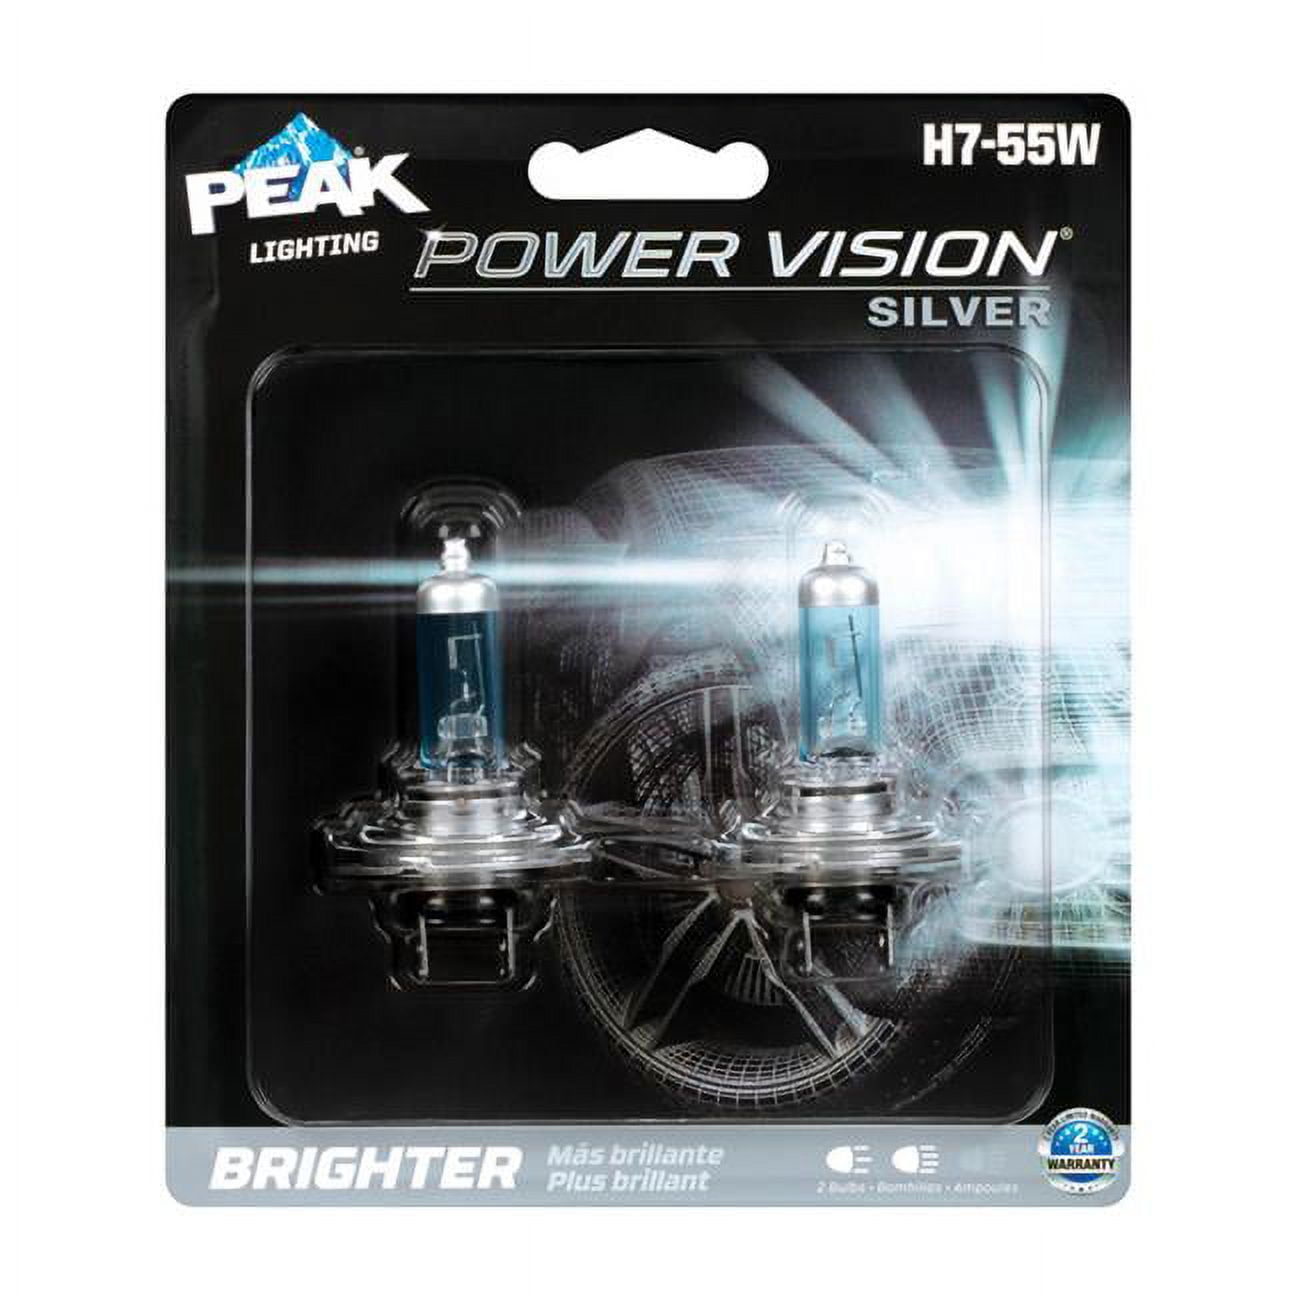 8020246 Power Vision Silver 12.8 V Halogen T3-1-4 Automotive Bulb - H7-55w - Pack Of 2